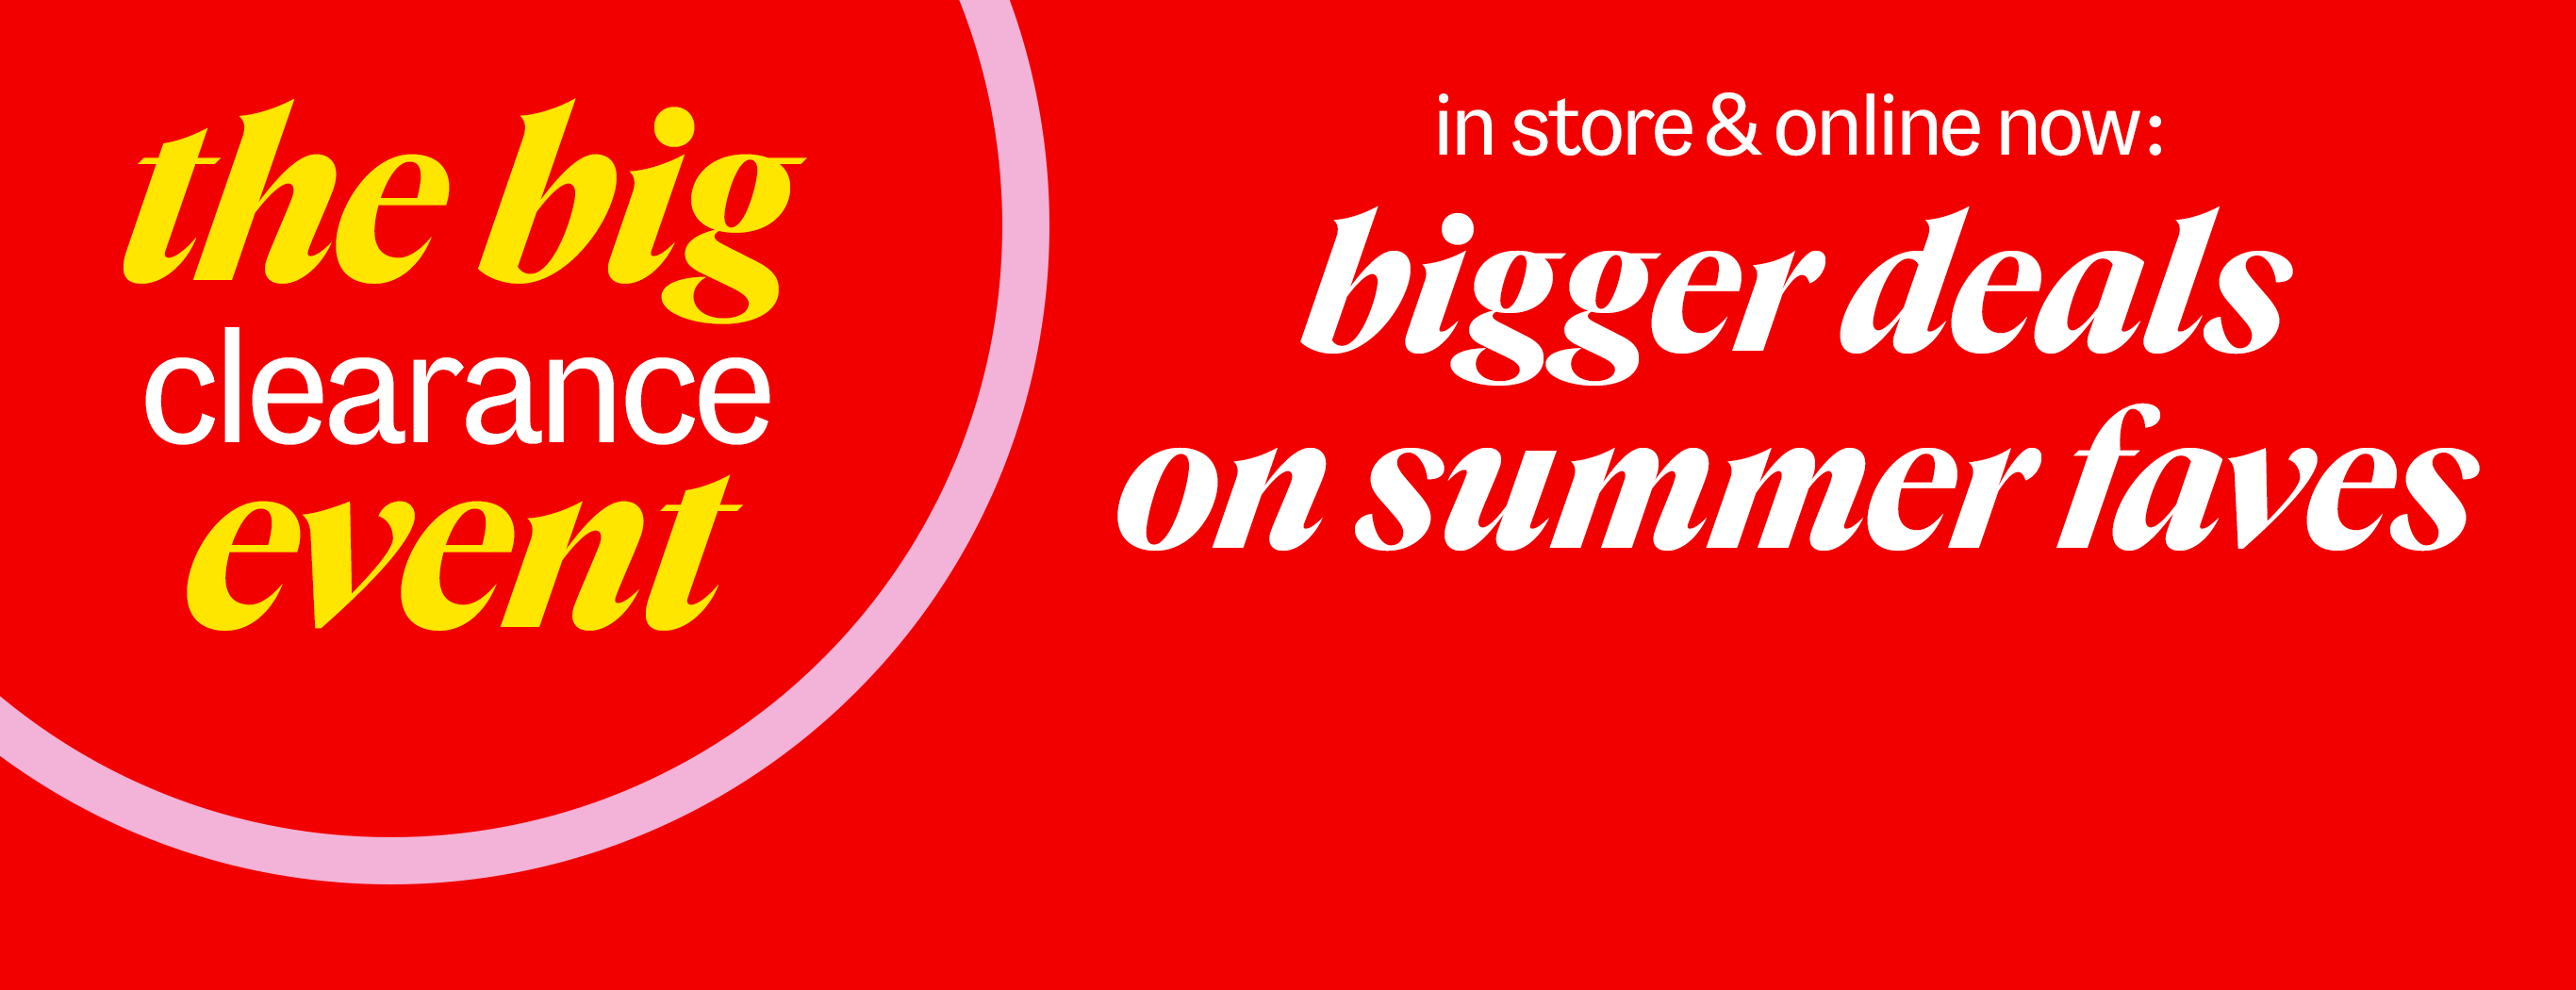 in store & online now: bigger deals on summer faves